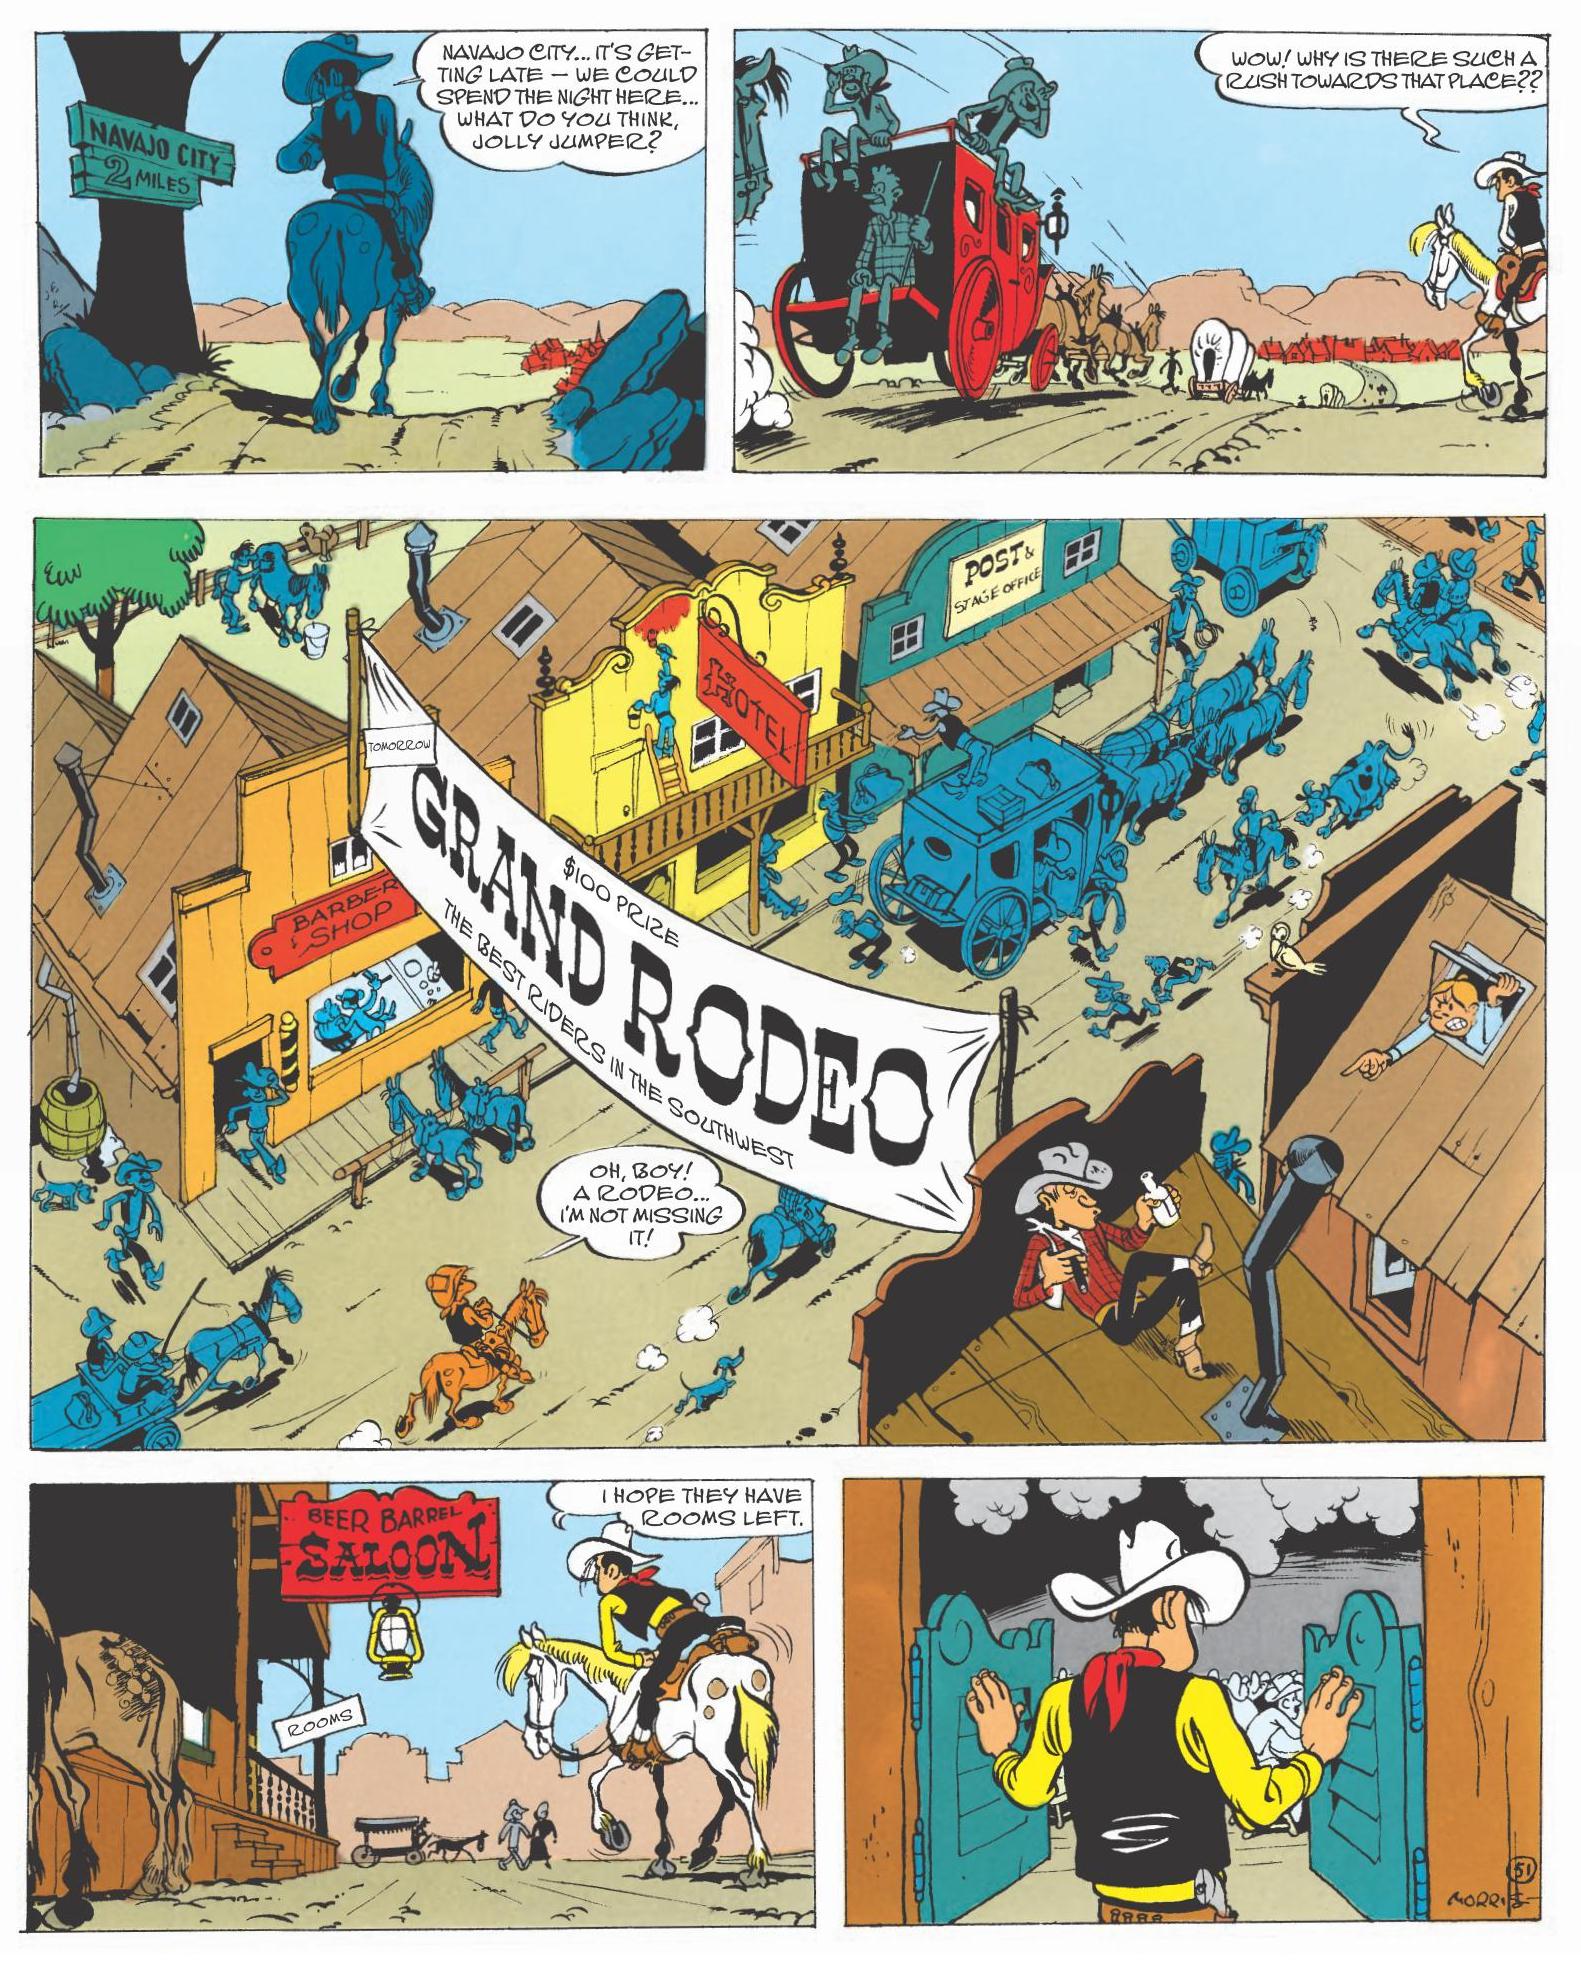 Lucky Luke Rodeo review